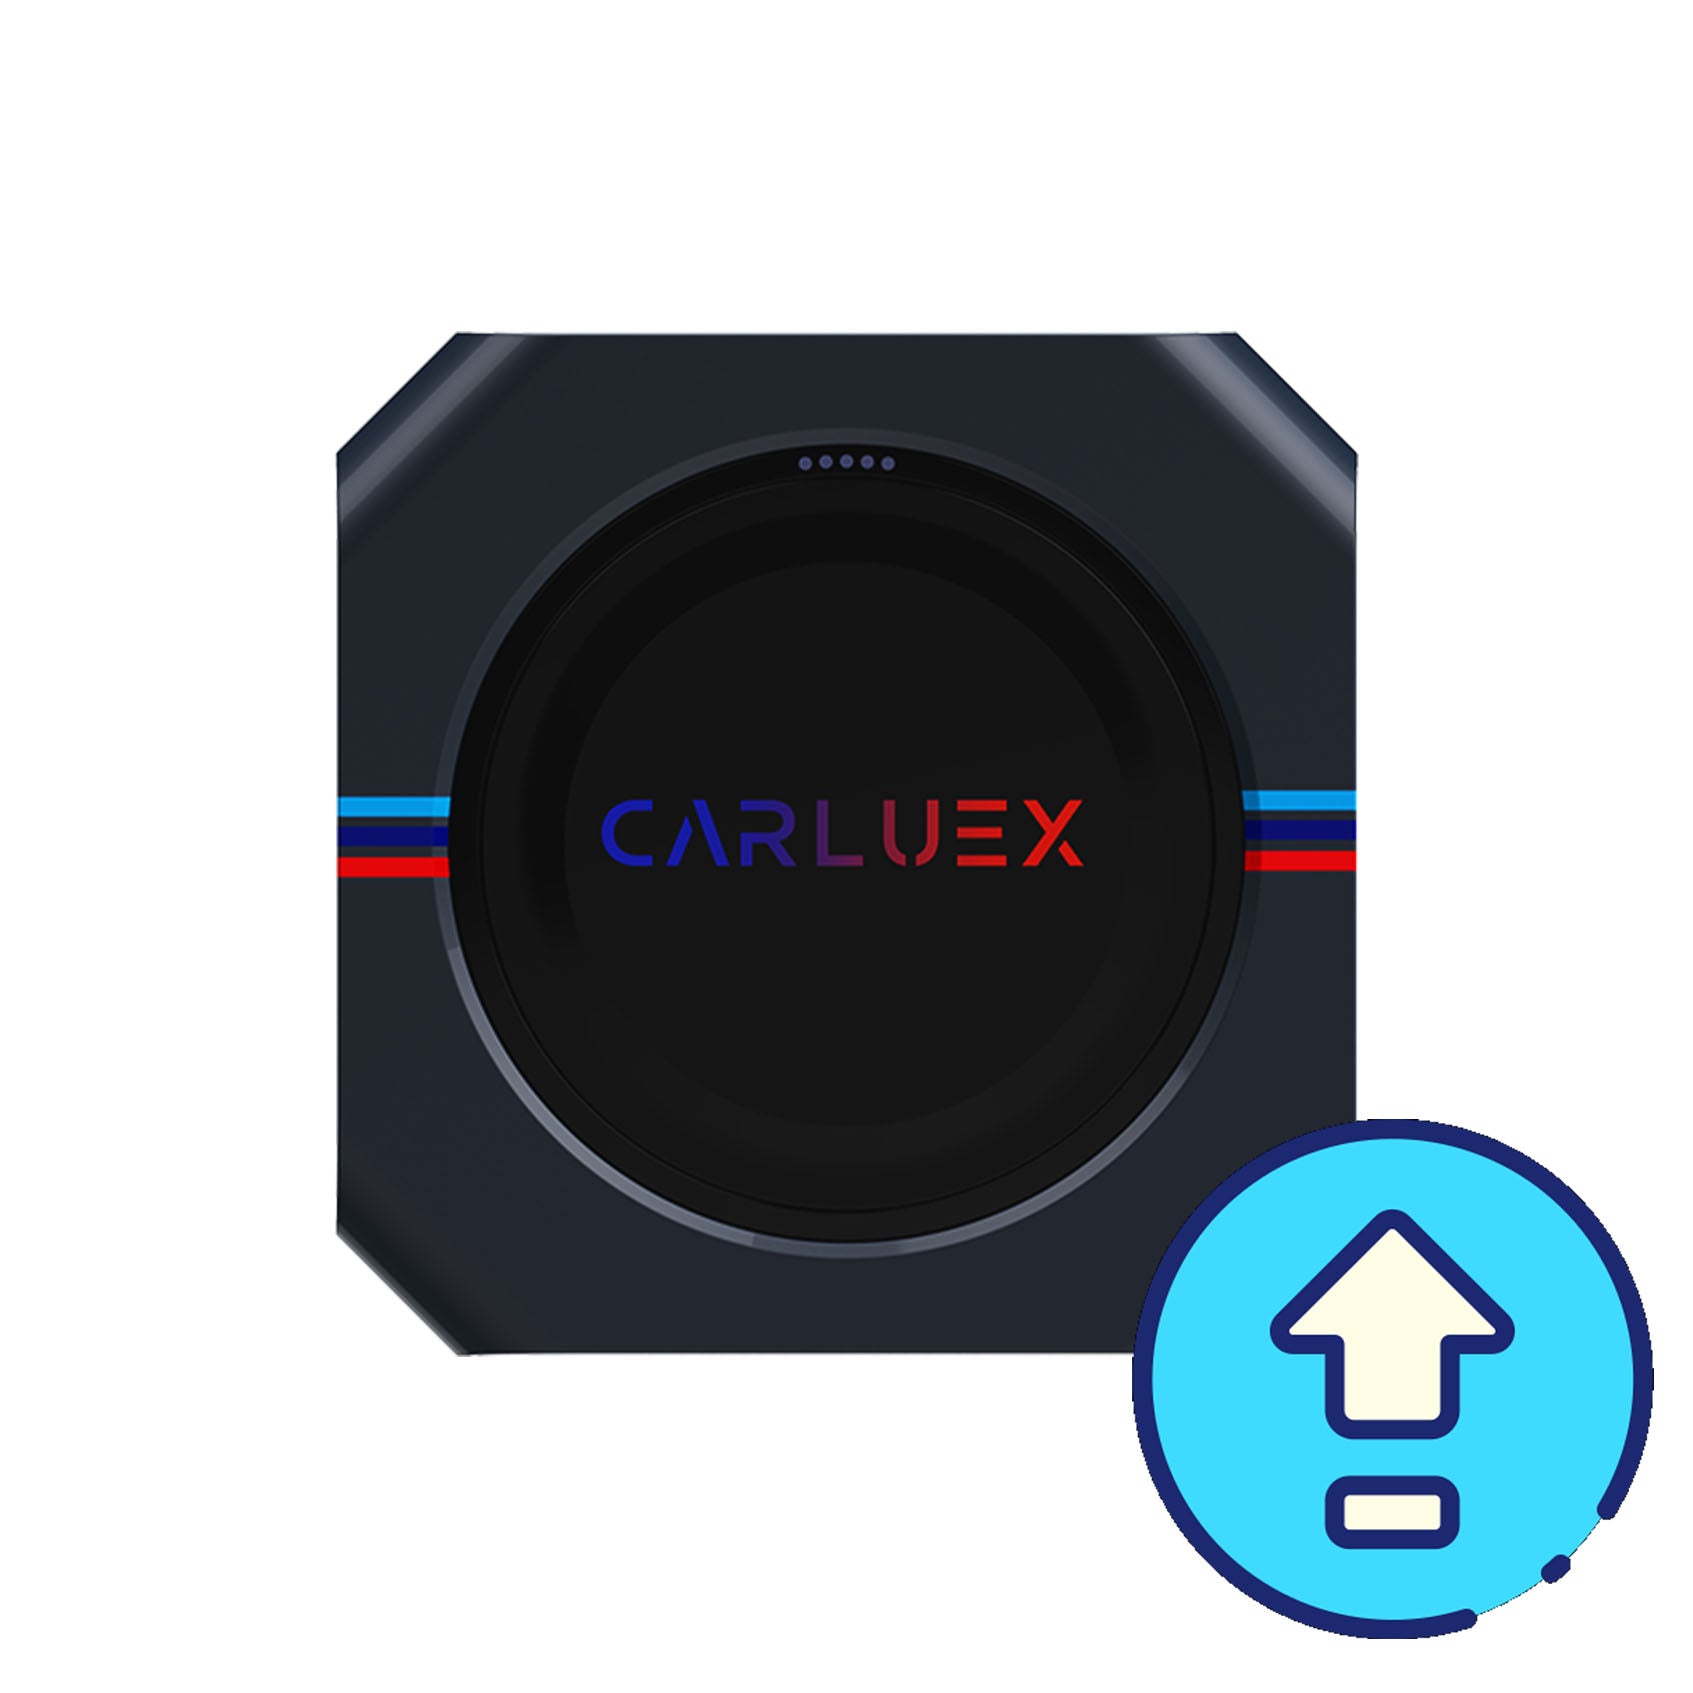 Introducing the Latest CARLUEX for BMW Update: Enhancements for an Elevated Driving Experience